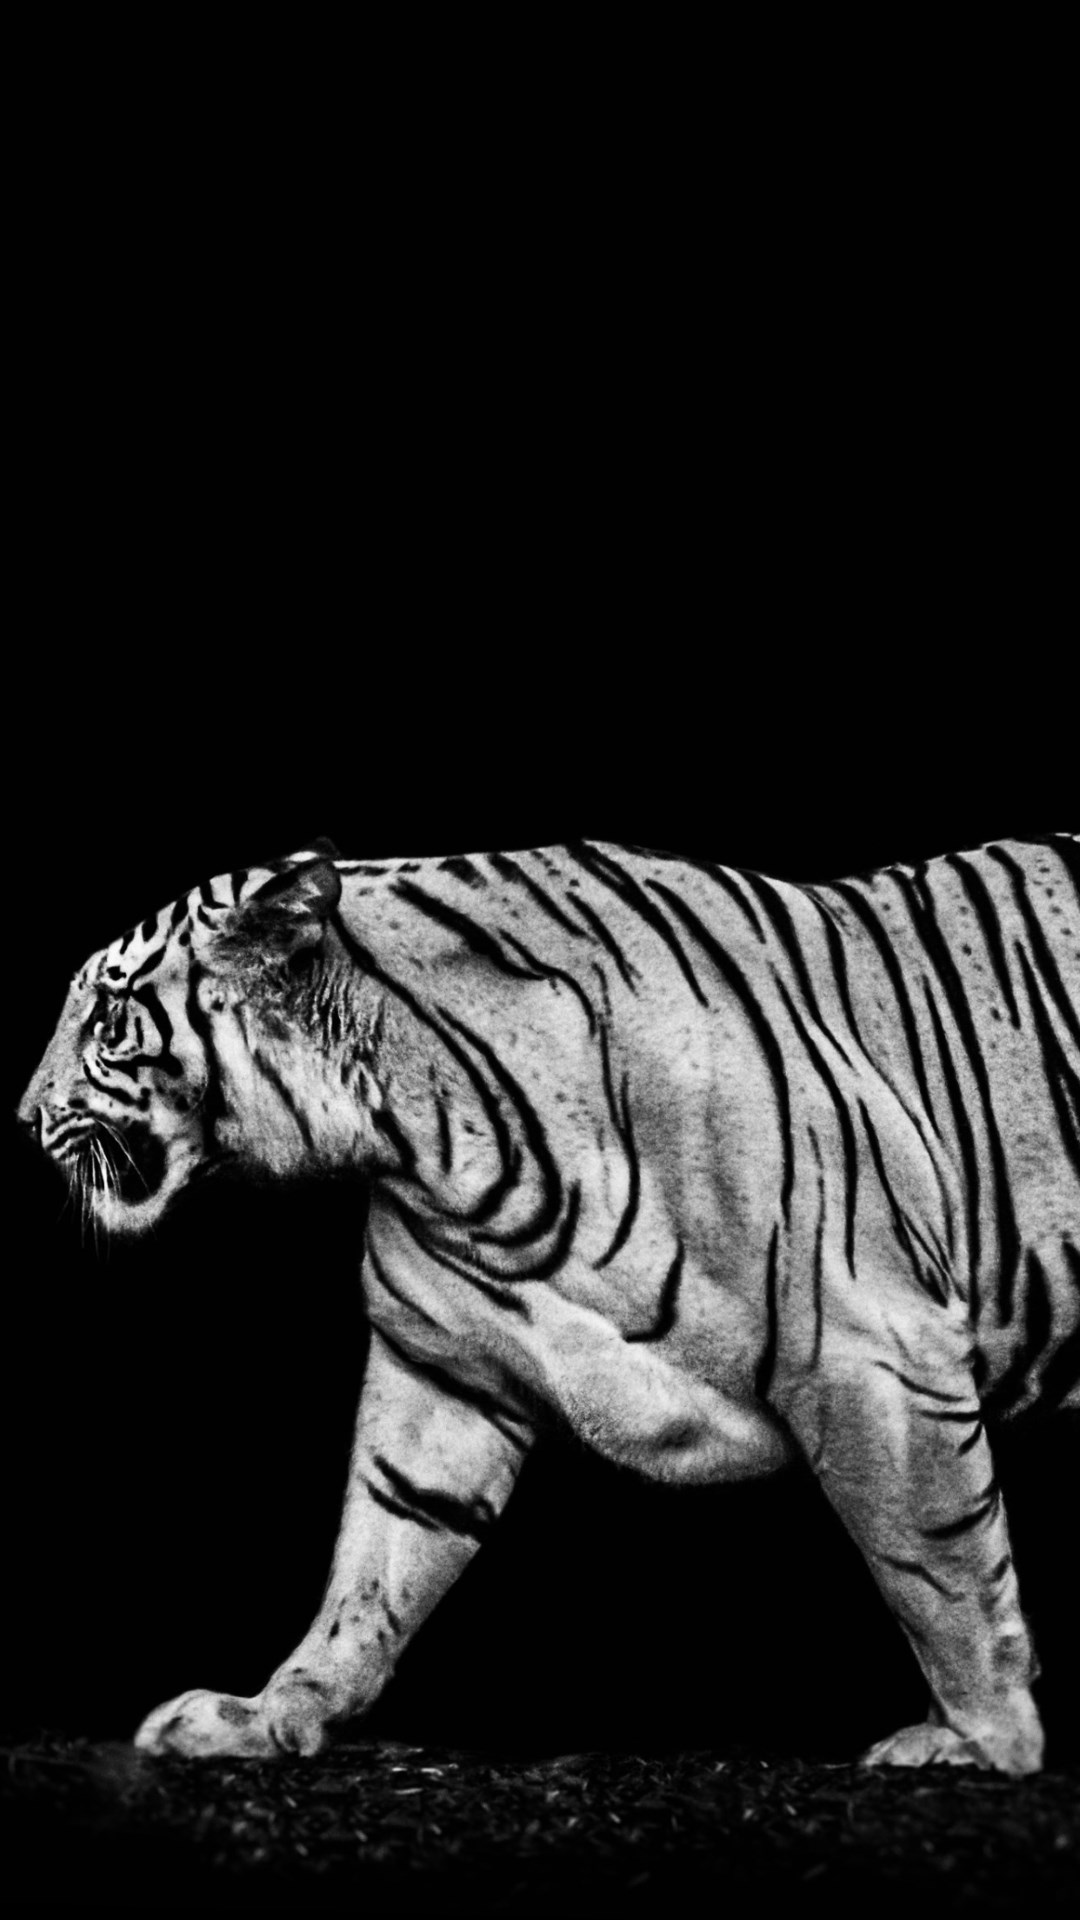 Tiger in the darkness wallpaper 1080x1920